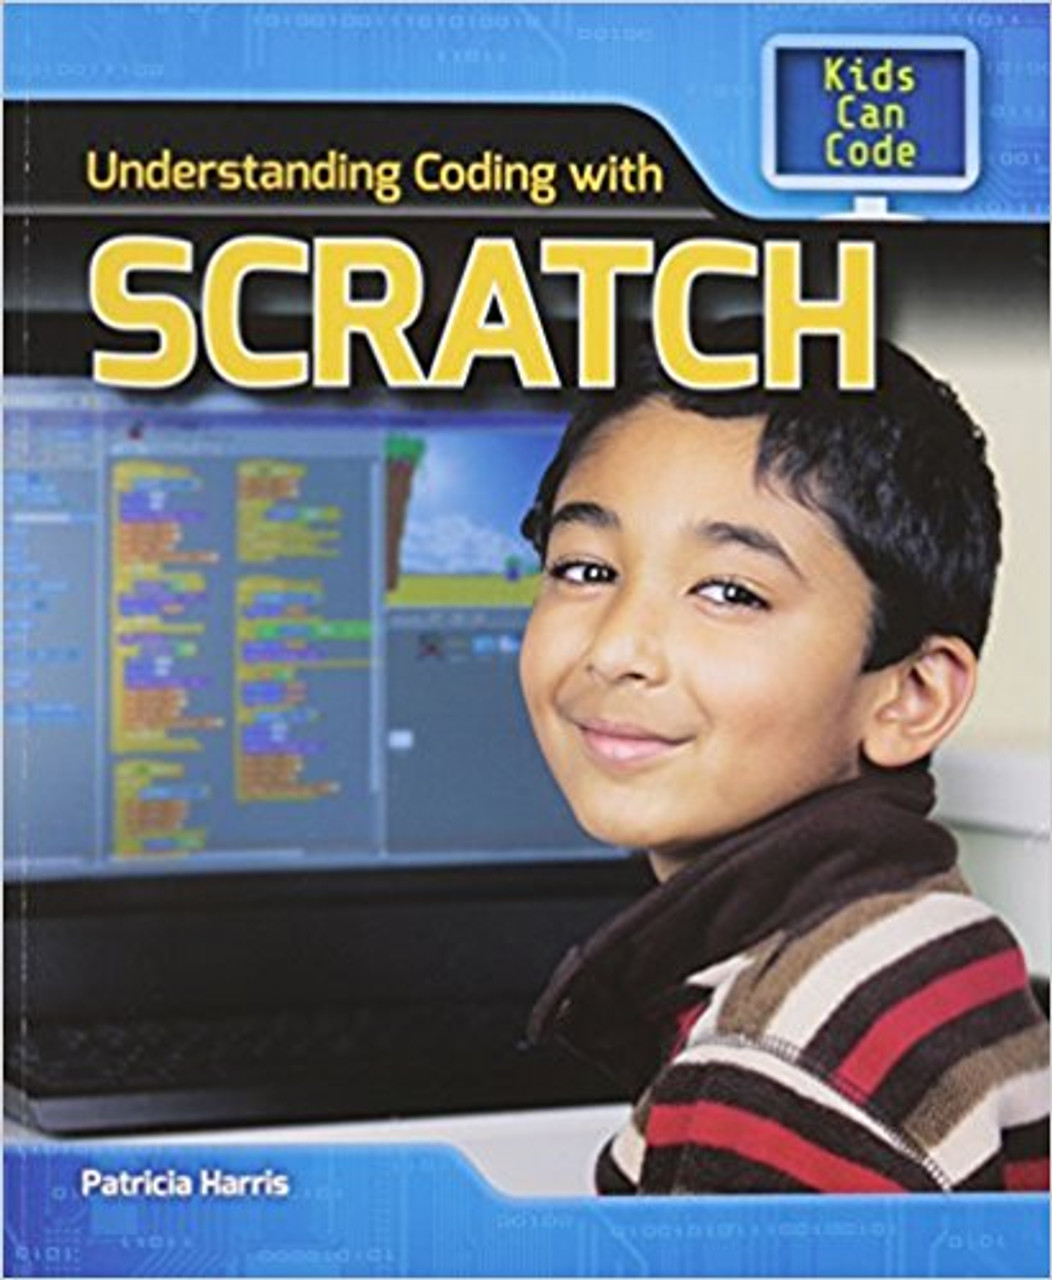 Understanding Coding with Scratch by Patricia Harris